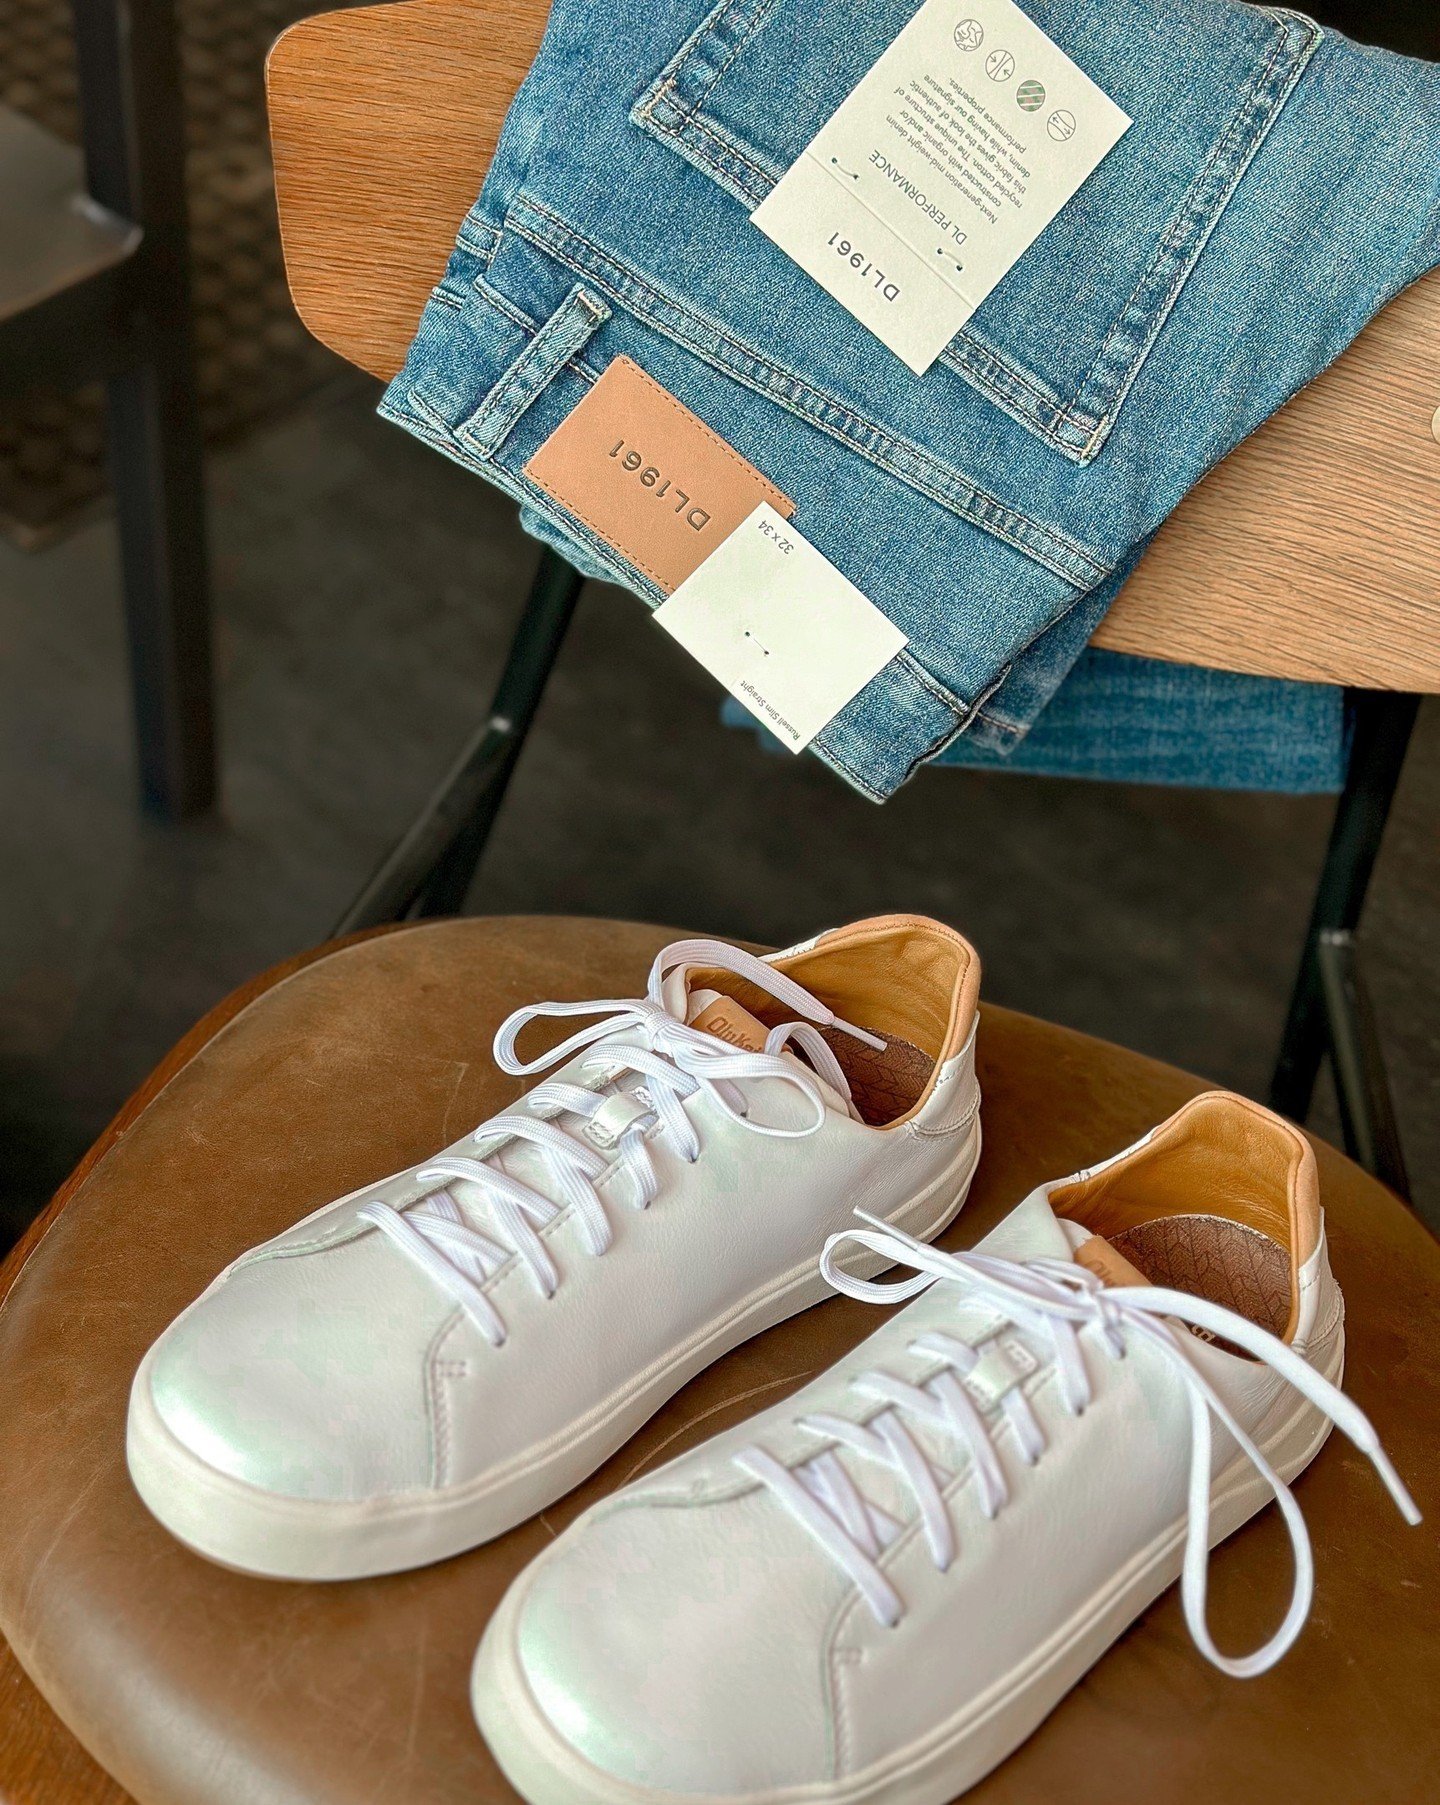 Spring dressing made easy. Pair up with medium wash denim and crisp white sneakers for a fresh look. We've got you covered with @olukai kicks and a variety of washes and fits from @dl1961denim. Come find your perfect match! 👖👟 ⁠
⁠
#SpringStyle #Den